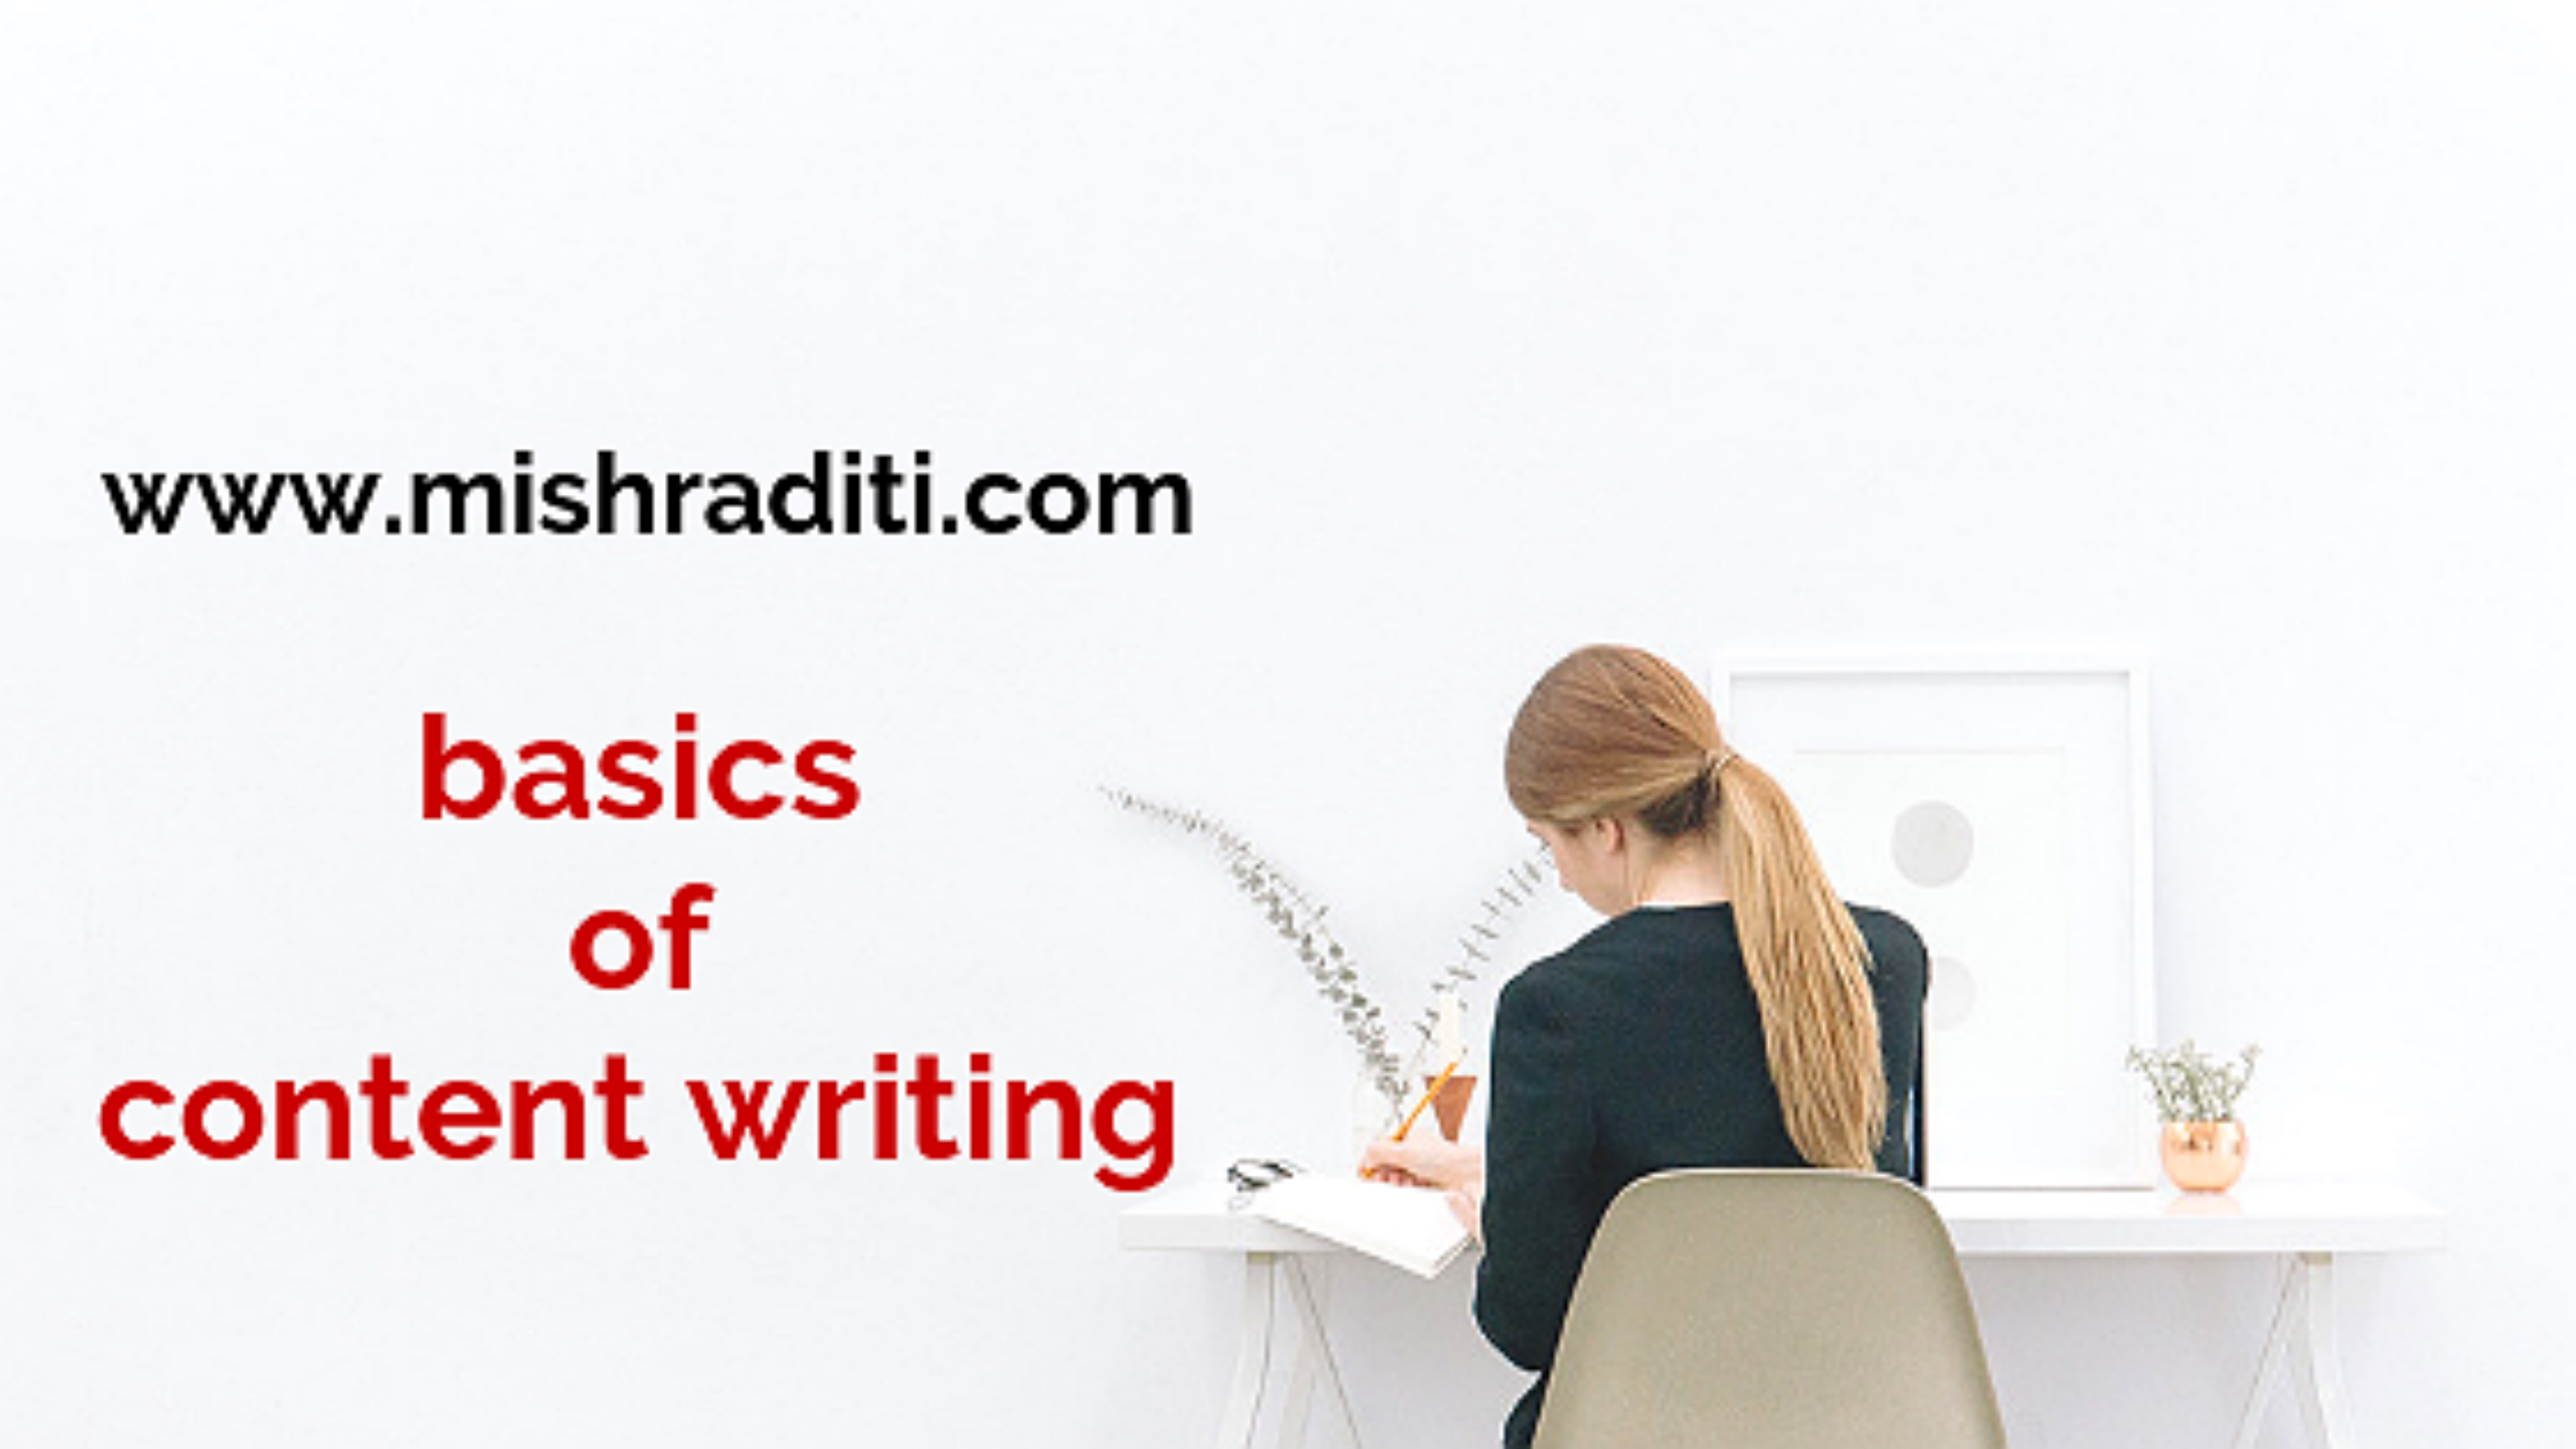 how to write content writing in english